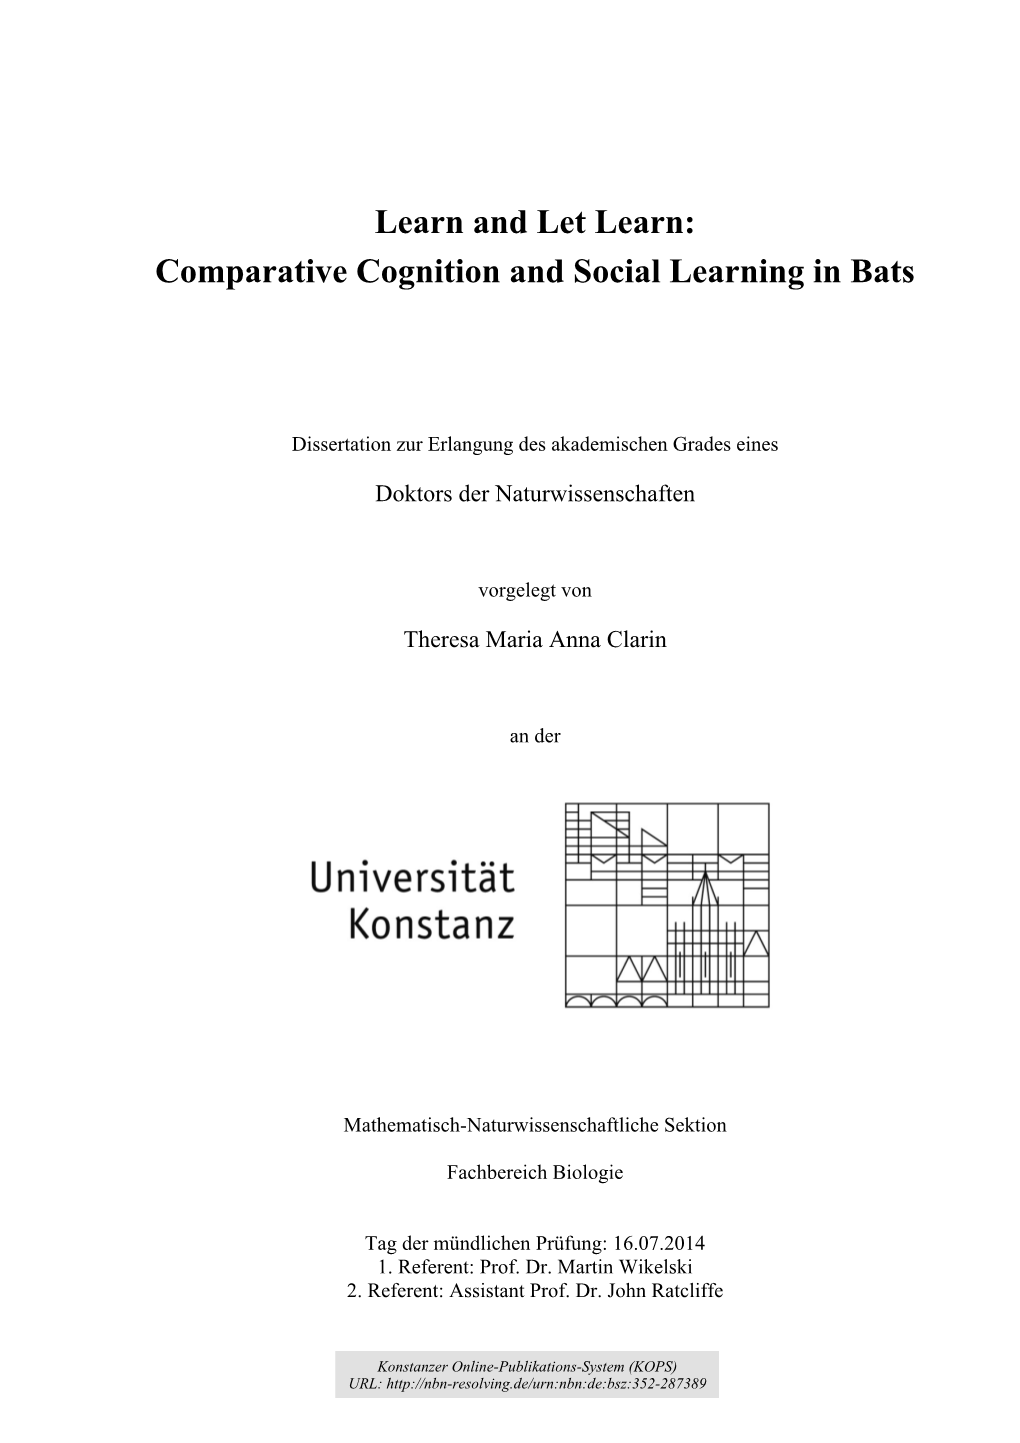 Comparative Cognition and Social Learning in Bats